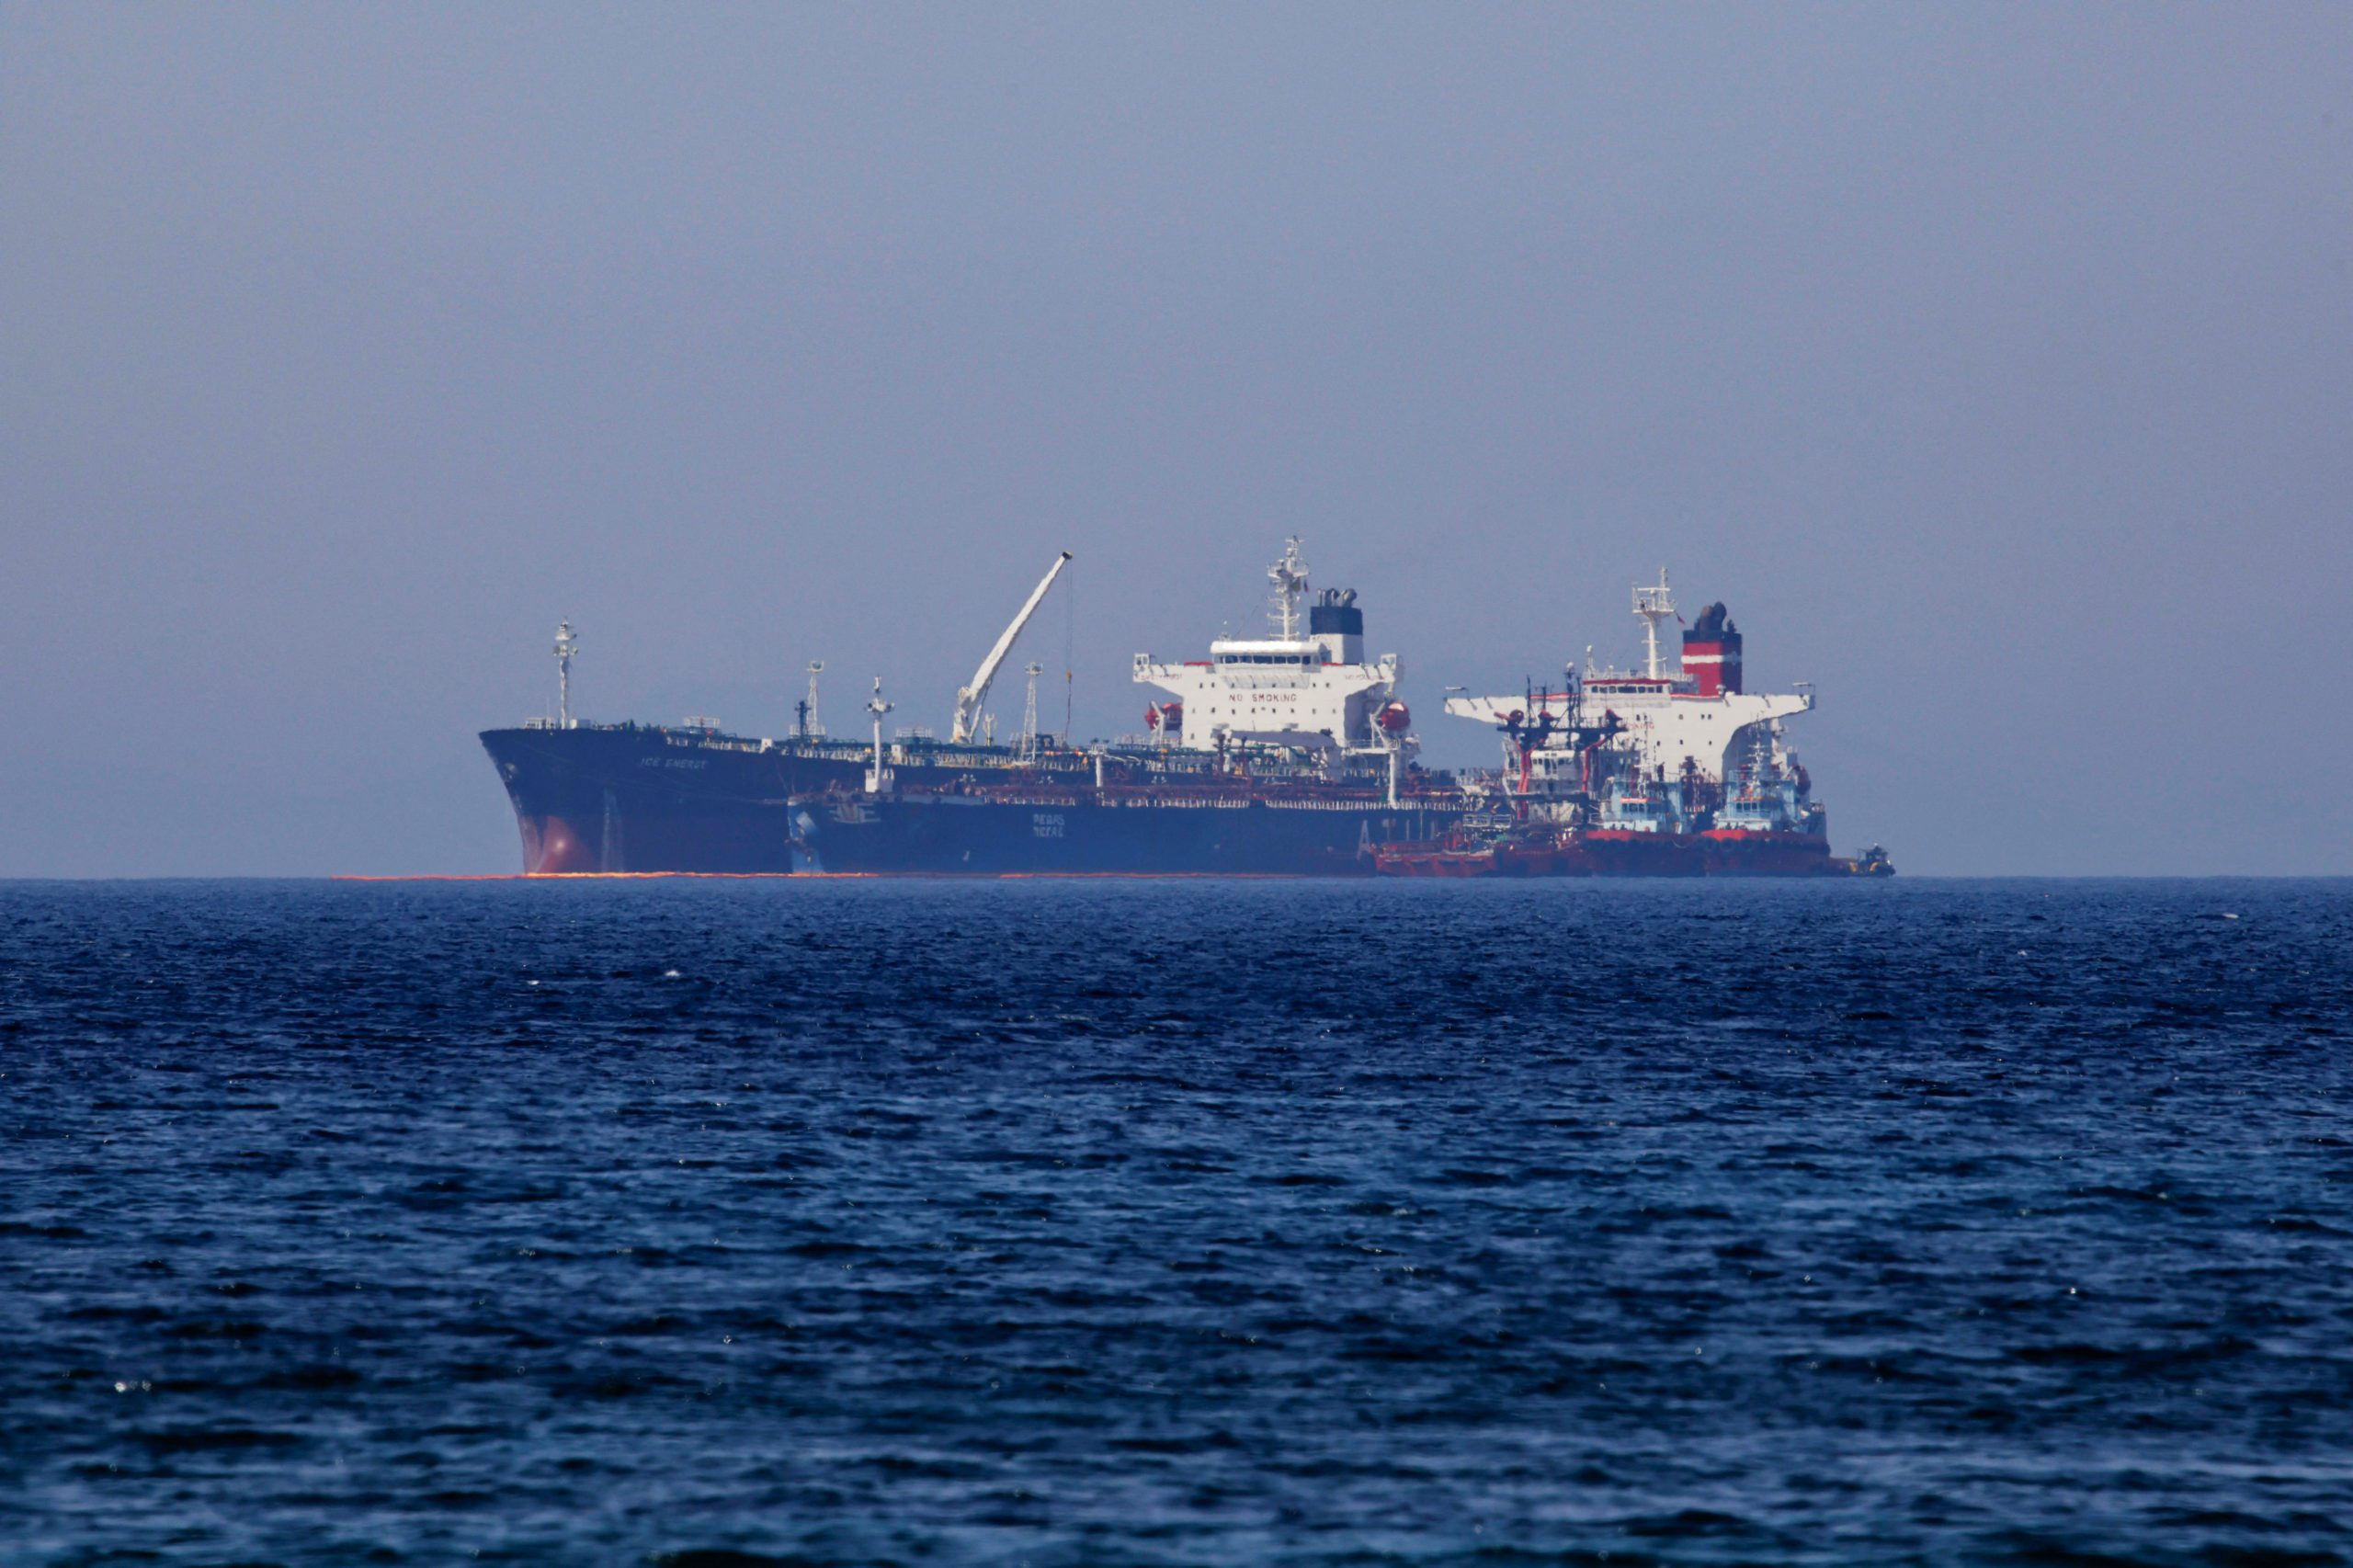 Tanker Market May A Get Sudden Boost If Iran Nuclear Deal Is Reached